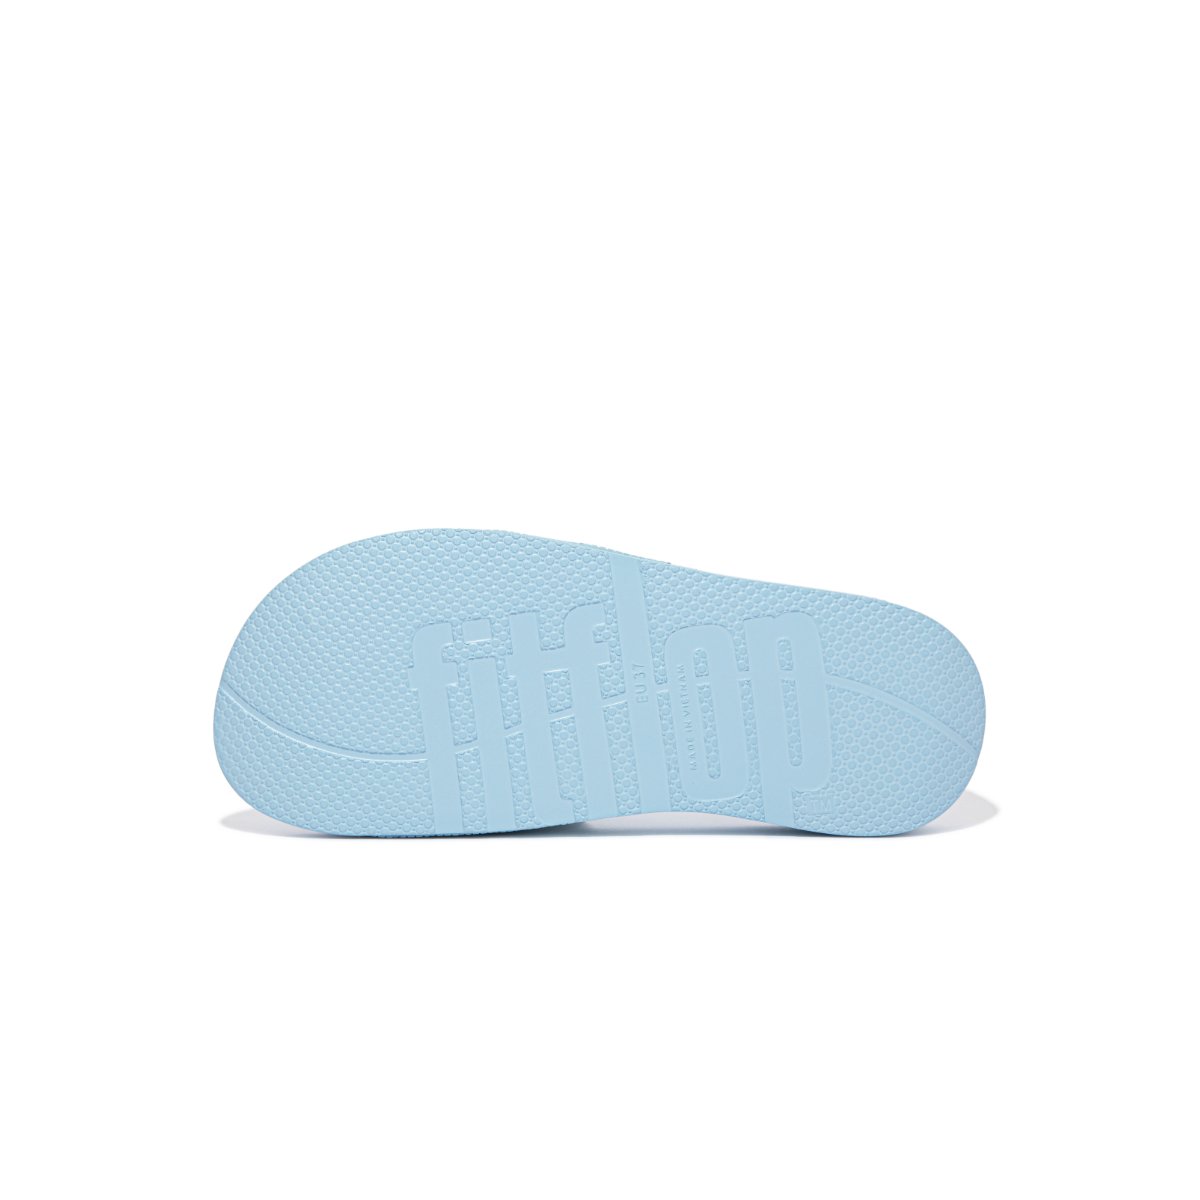 FitFlop iQUSHION Pool Sliders Sky Blue outsole